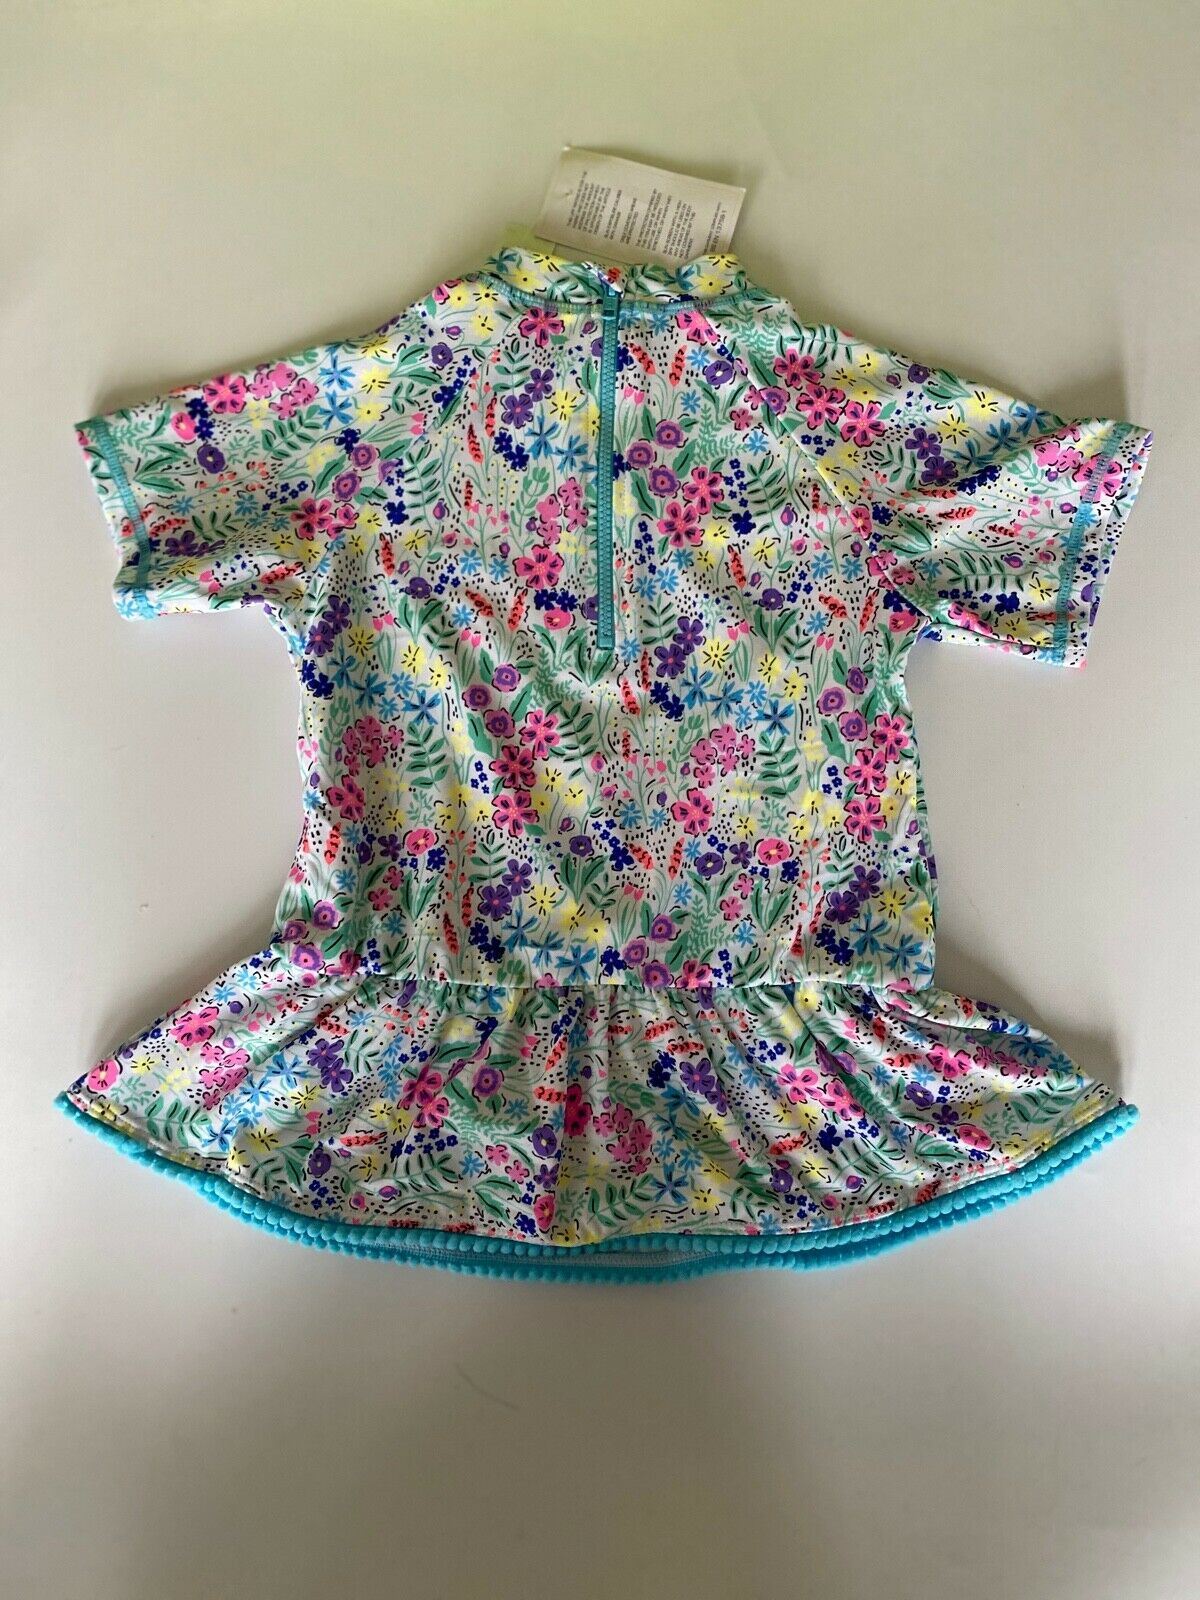 Girls VERY Neon Floral Sunsafe x2 Swimwear Tops Age 4-5 Bottoms are missing